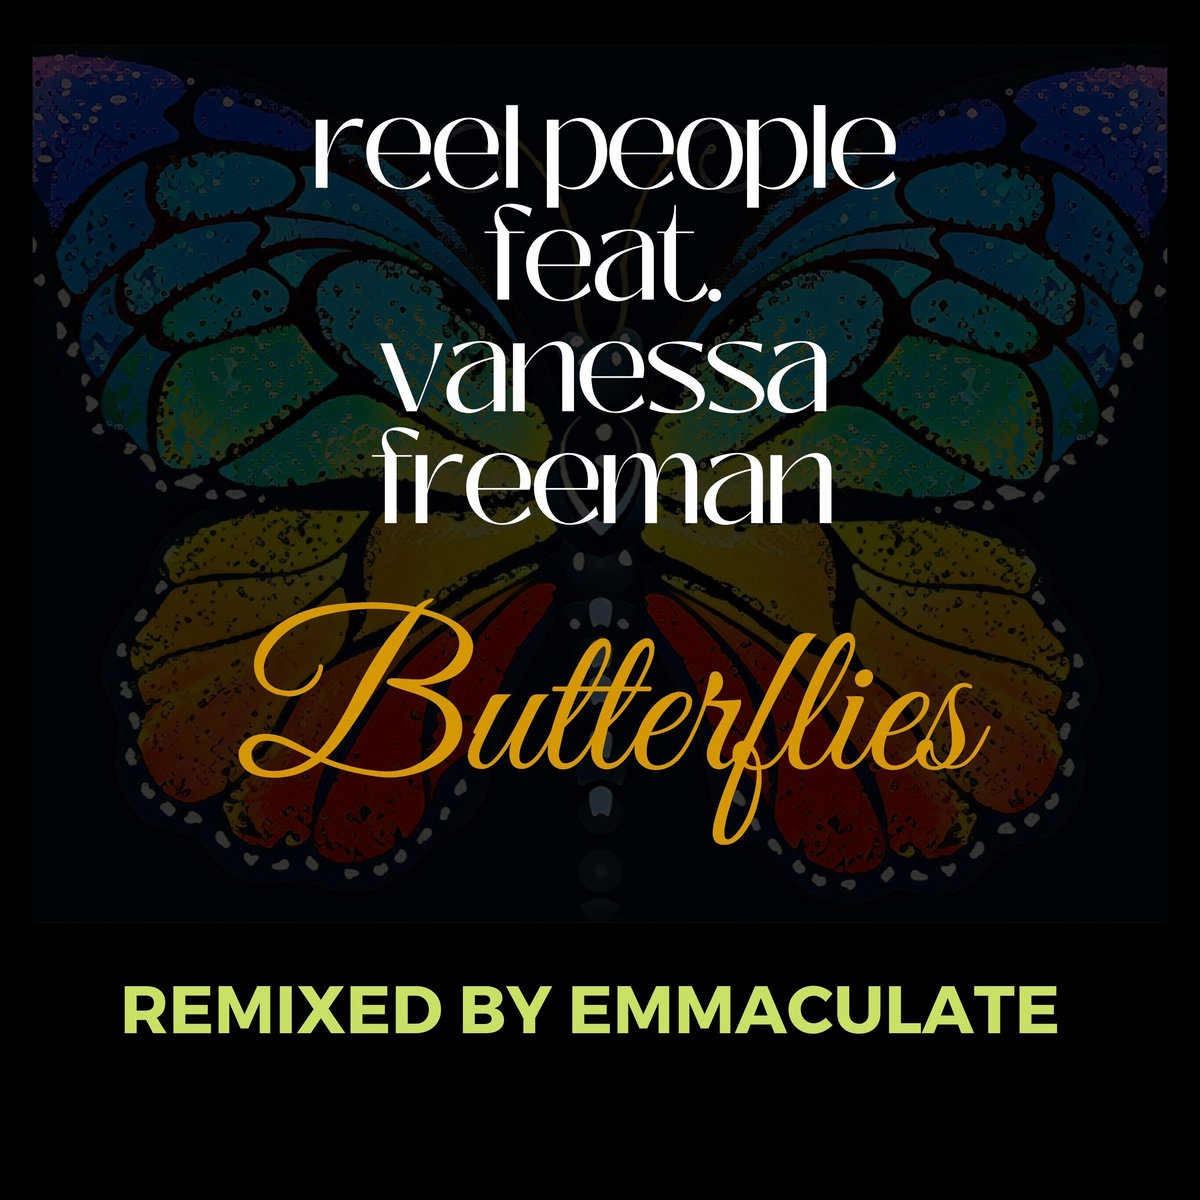 ⭐ Recommended #digital purchase ⭐ Butterflies 🦋🦋🦋 (Remixed by @DJEmmaculate) by Reel People featuring @VanessaFreeman courtesy of @ReelPeopleMusic and via @Bandcamp ➡️ ow.ly/Mxlt50LTEKZ. #NewMusic #NewMusicFriday #SoulfulHouse #TGIF #FridayFeeling #FF #Friyay 👍🏾❤️🔥